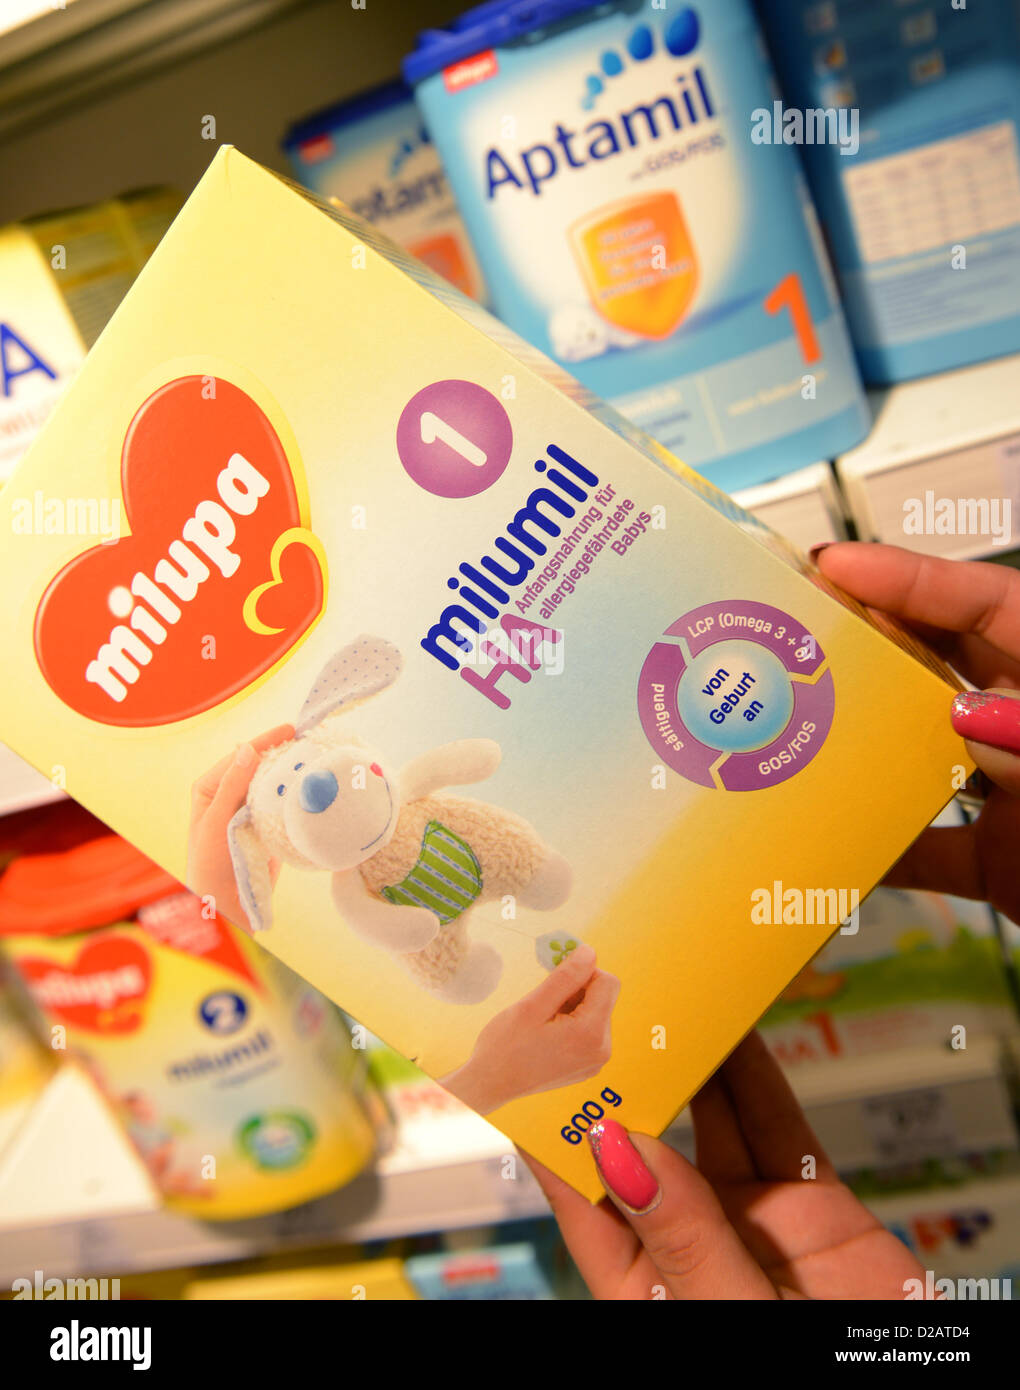 ILLUSTRATION - An illustrated picture shows a woman holding a pack of Milupa Milumil by the Danone Group in a shop in Frankfurt Main, Germany, 18 January 2013. Worries by Chinese parents for the safety of their children has caused supply bottlenecks of baby food. Demand of dried mil products Milumil and Aptamil rocketed in China in the last few months. There was a food scandal in China in 2008 beacause of milk contaminated with the industrial chemical Melamine. Photo: Arne Dedert Stock Photo